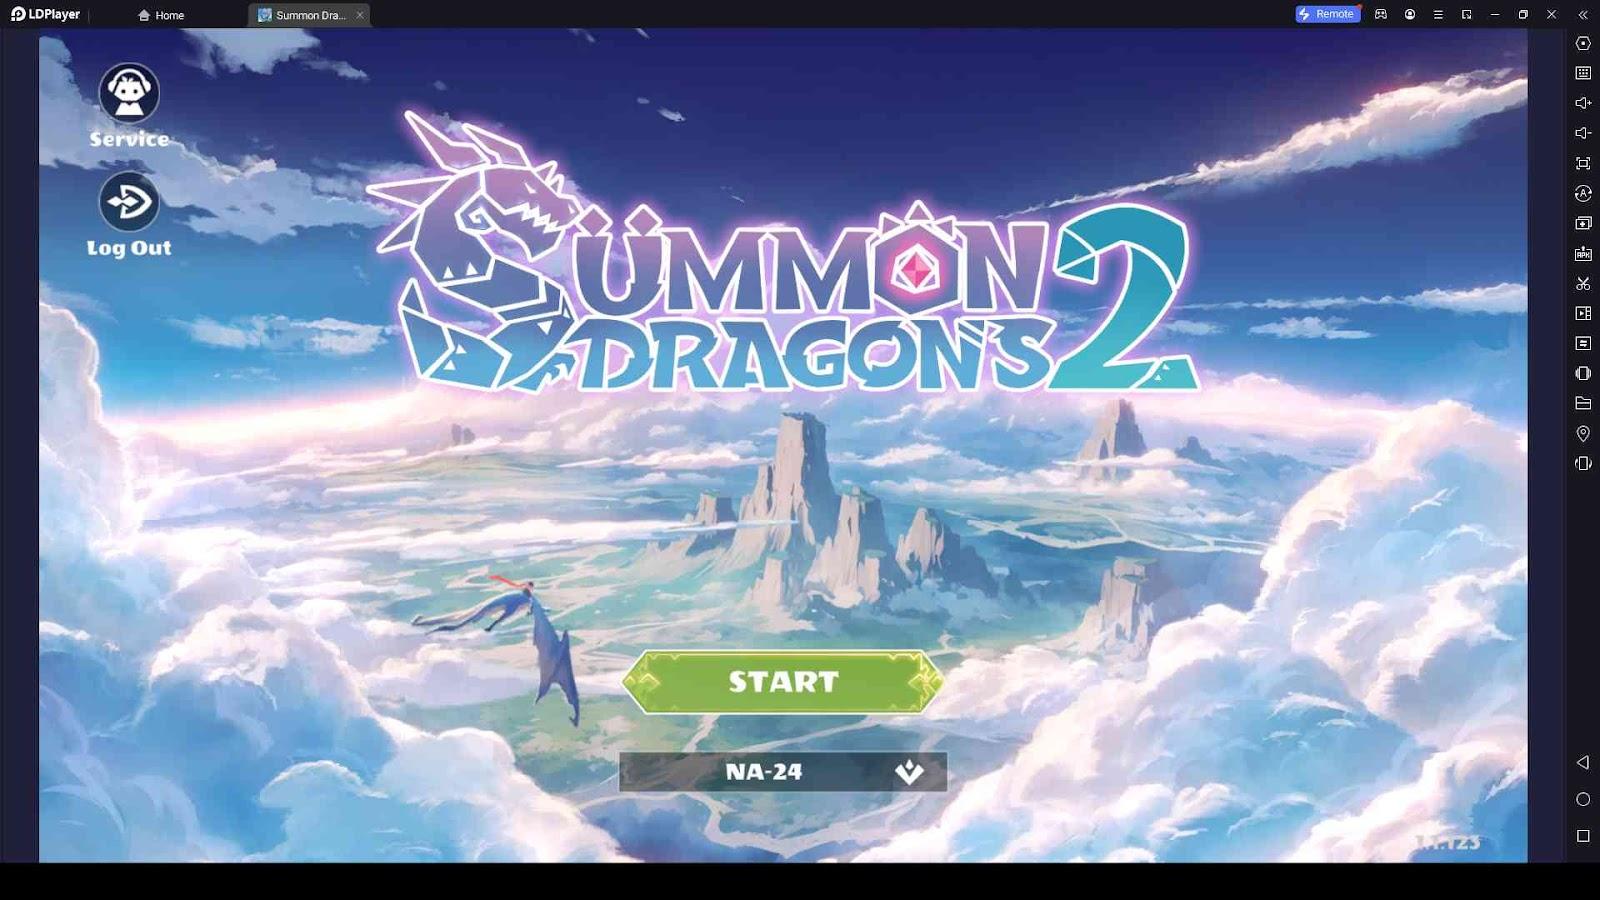 Summon Dragons 2 Tips and Tricks